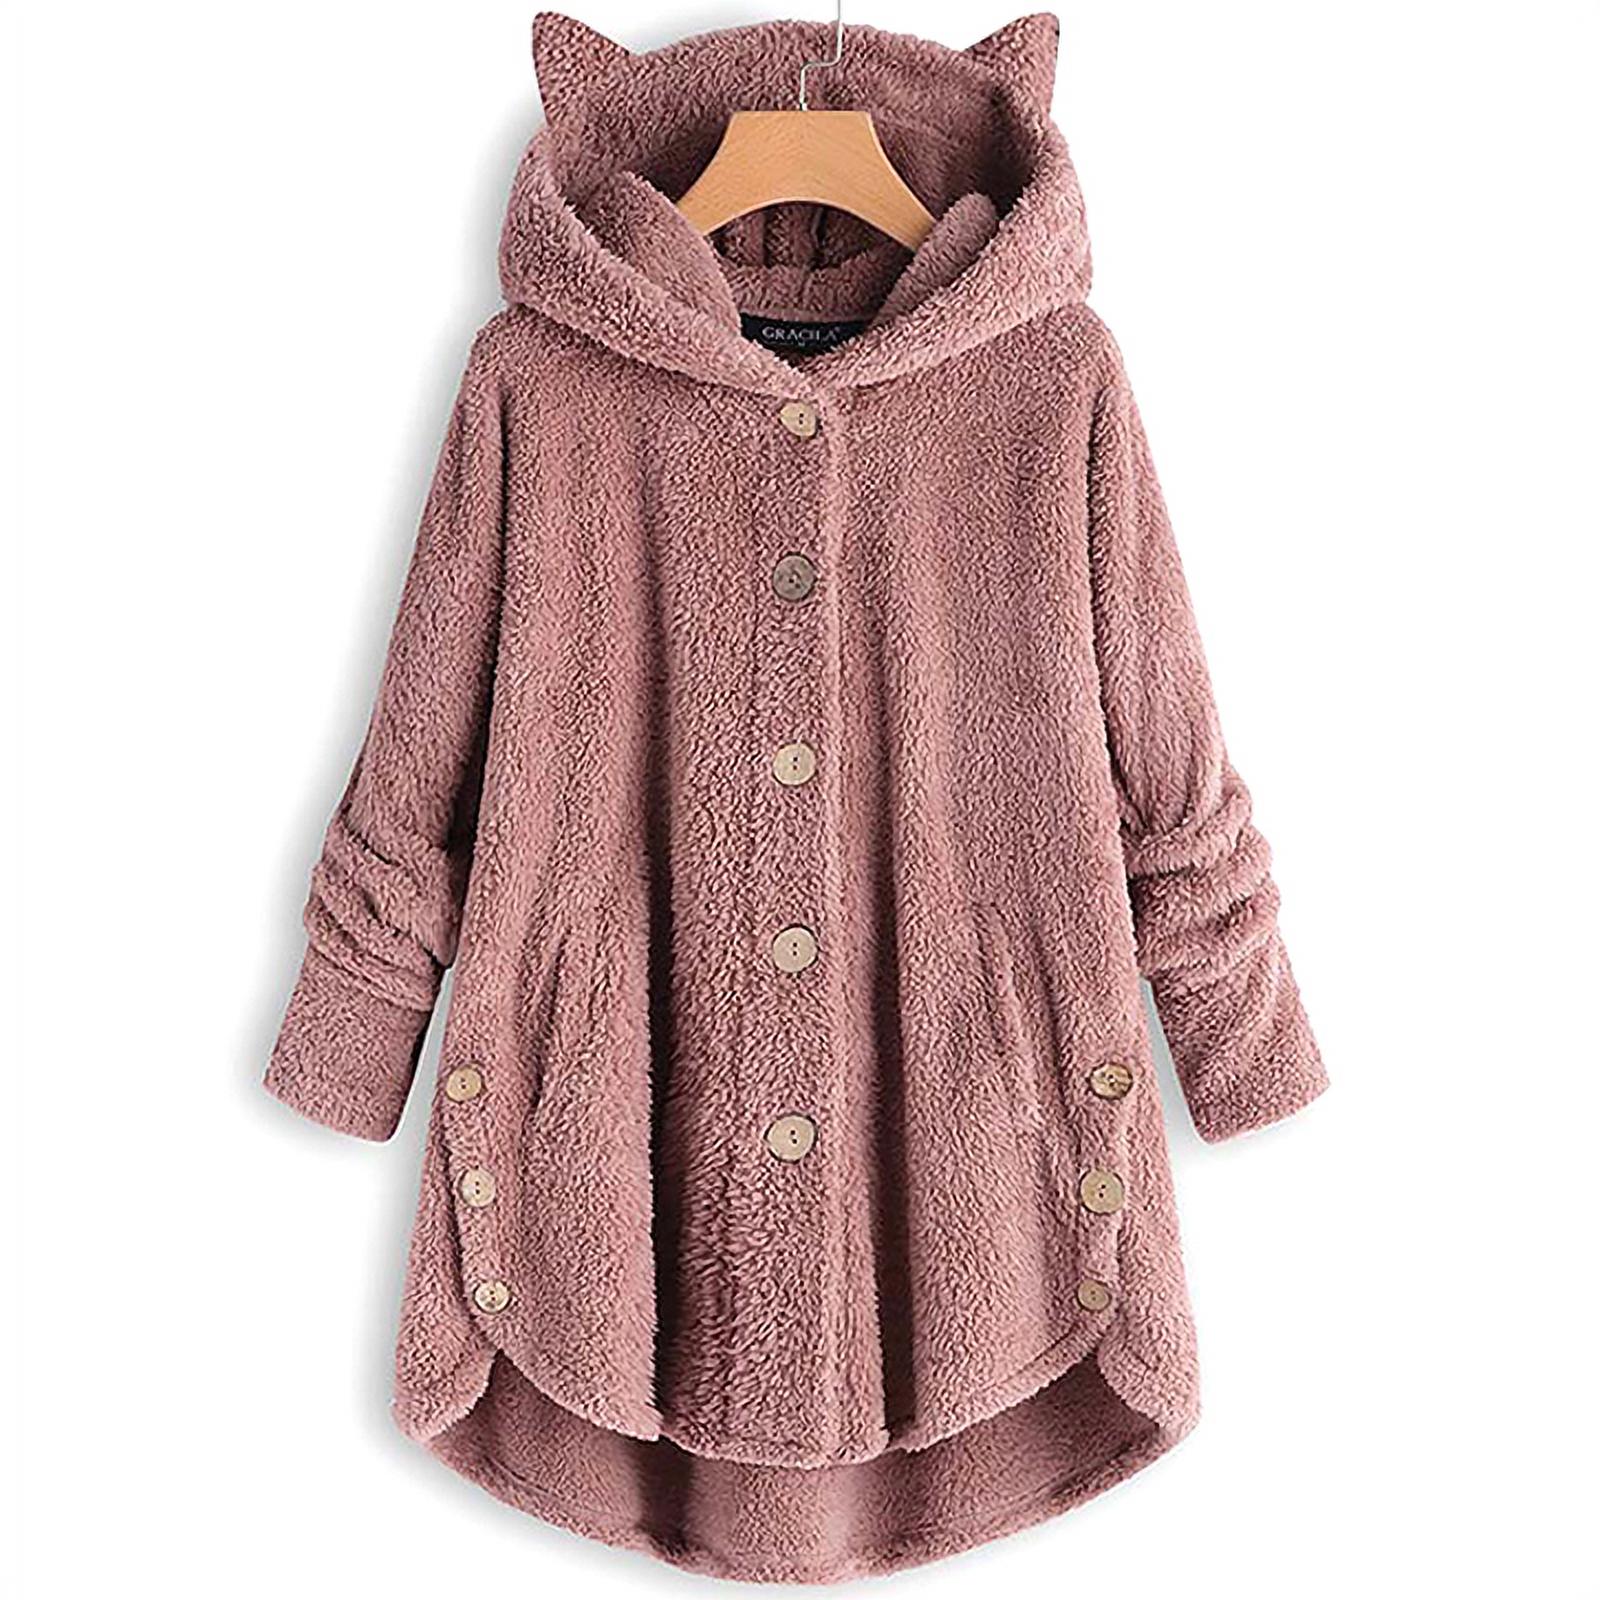 Women's Fashion Long Sleeve Button Faux Shearling Shaggy Oversized Coat Jacket with Pockets Warm Winter - image 1 of 3